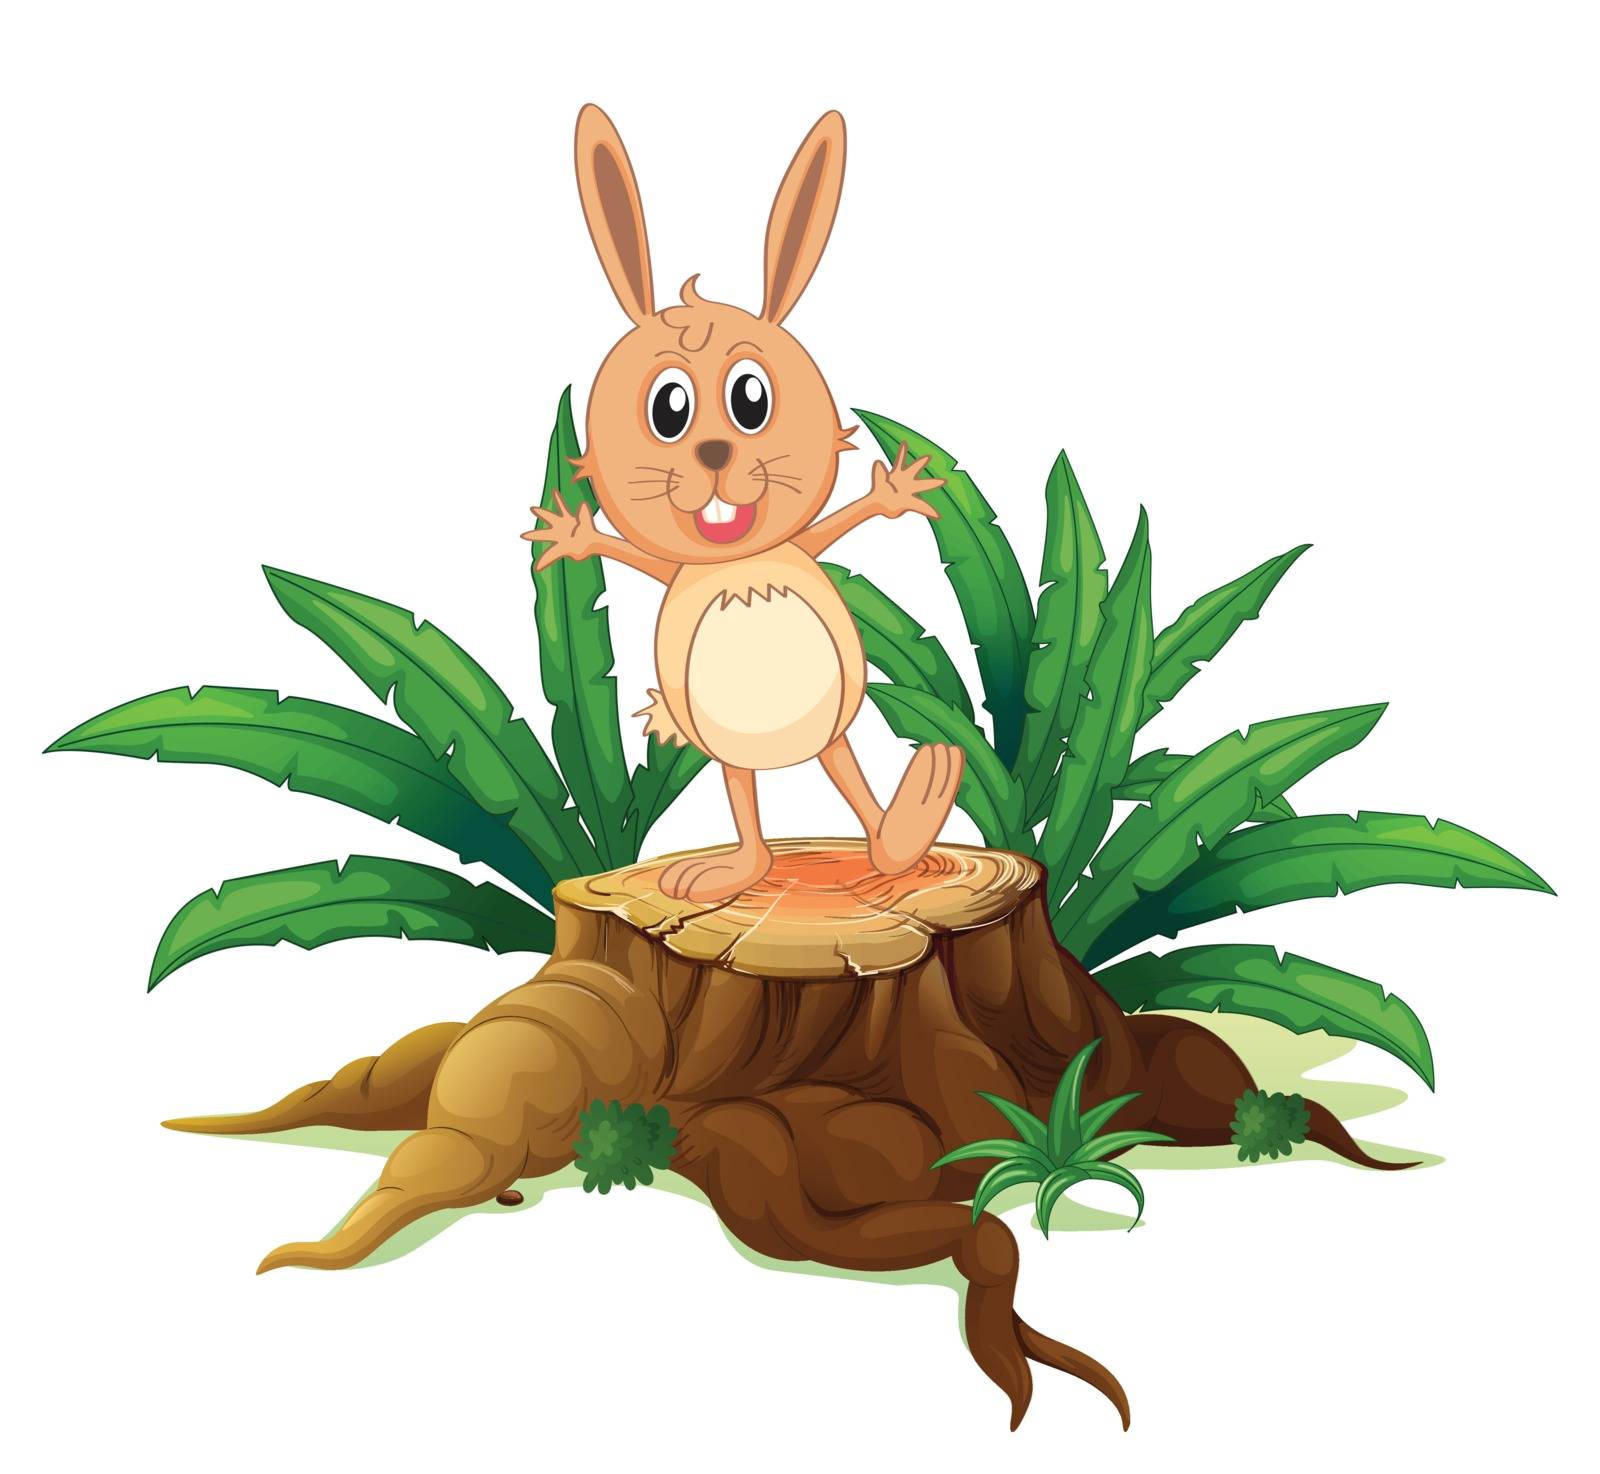 Illustration of a rabbit above a stump on a white background